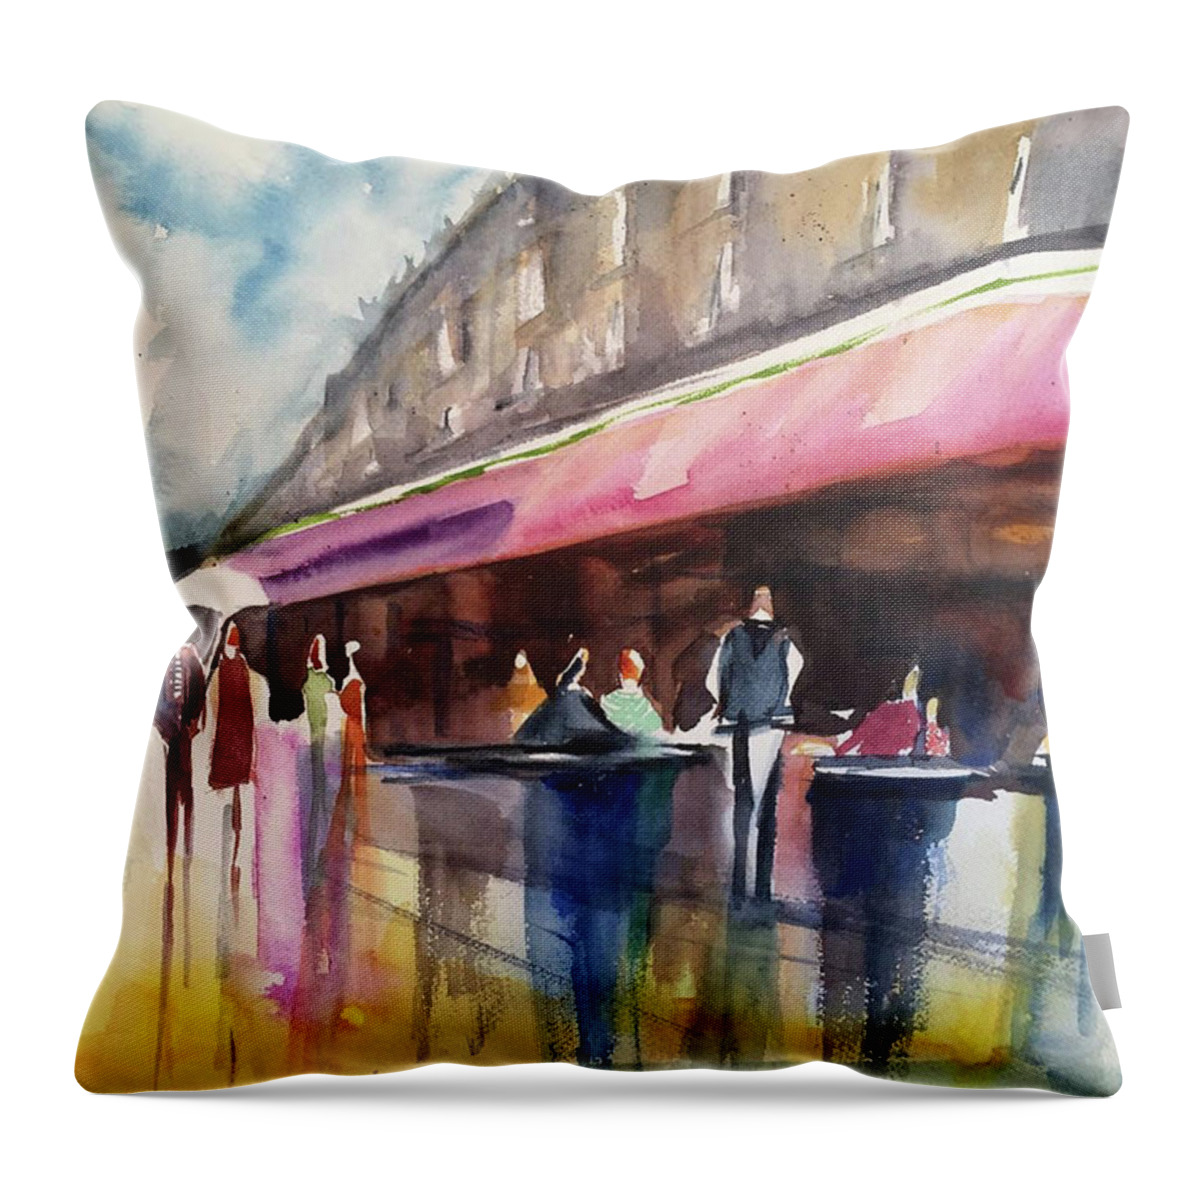 Landscape Throw Pillow featuring the painting Wine Or Tea? by Bonny Butler